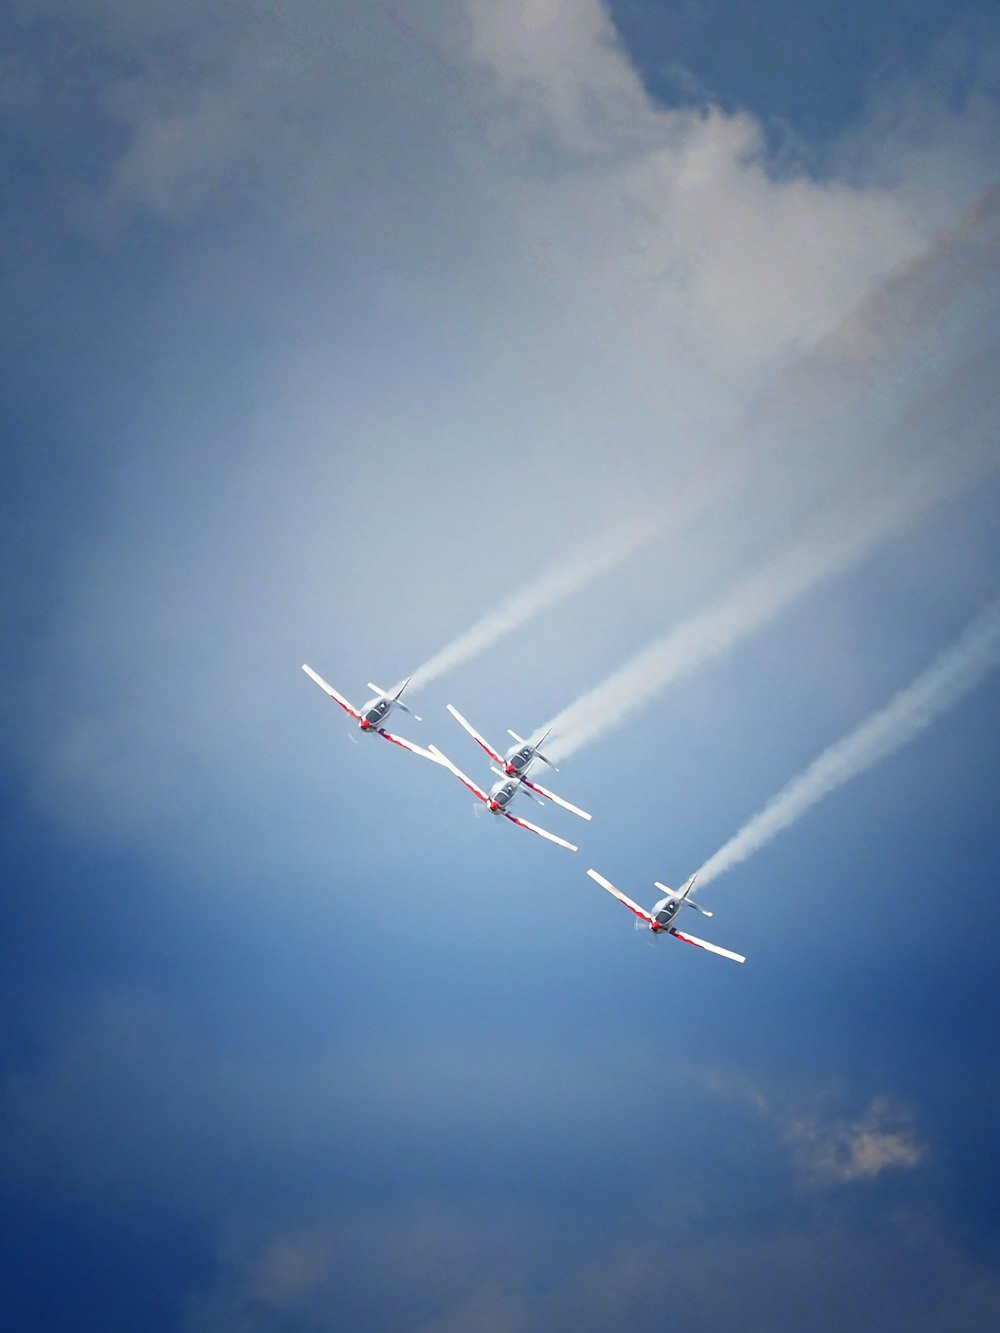 two airplanes are flying in formation in the sky